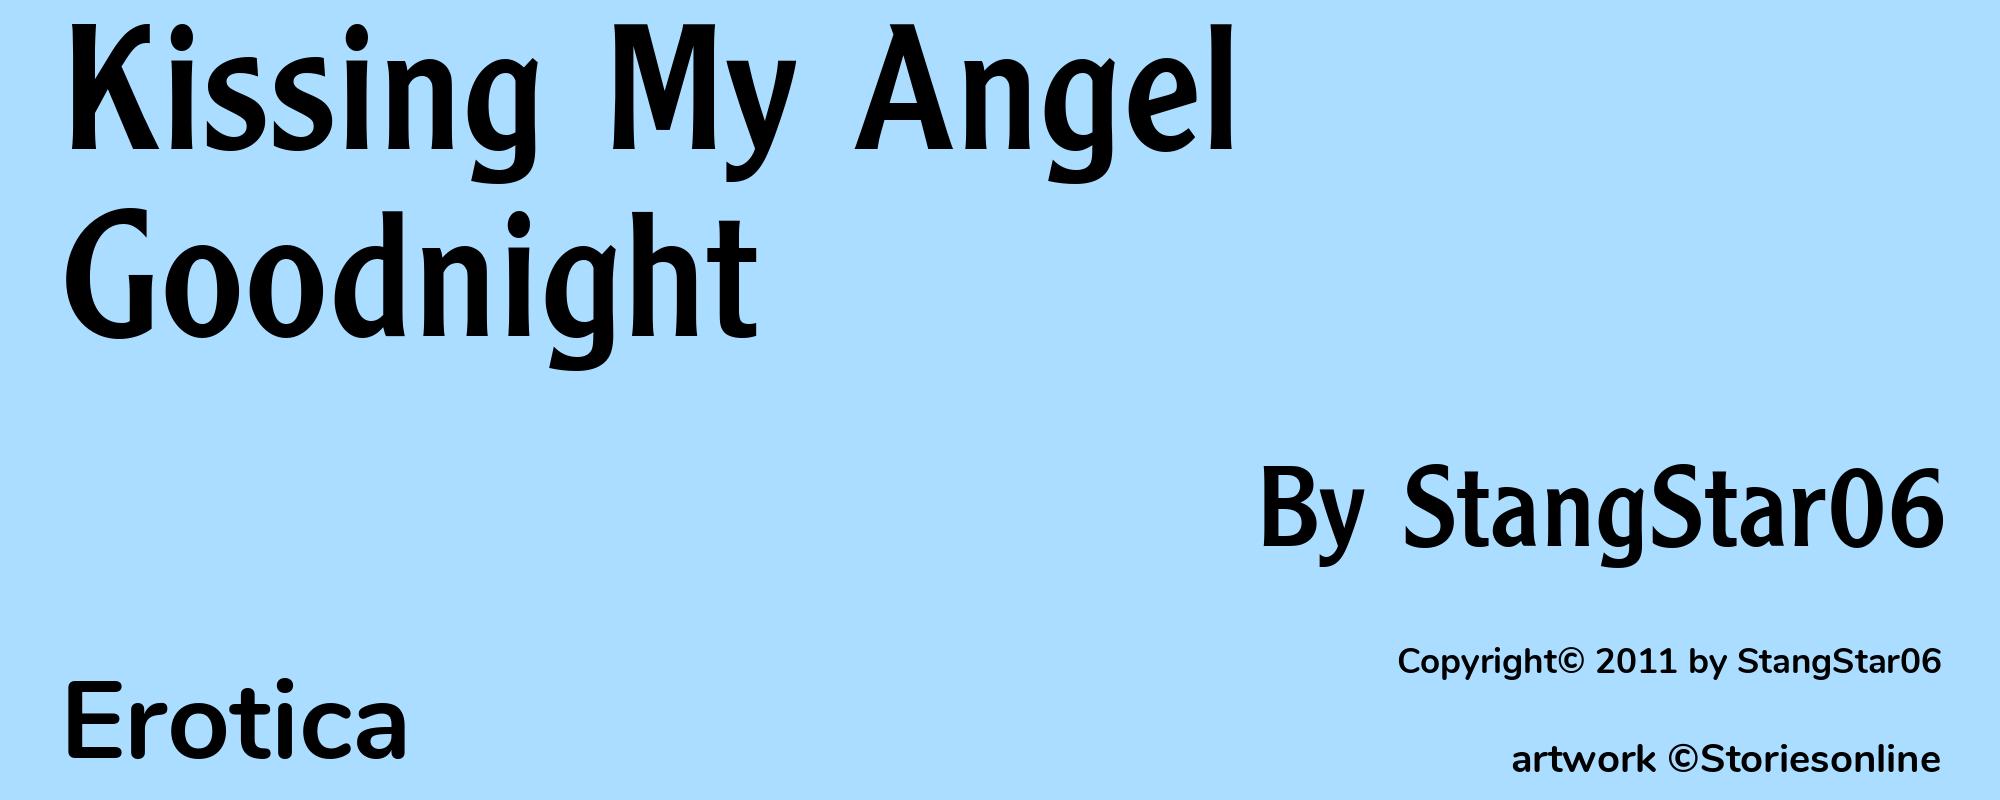 Kissing My Angel Goodnight - Cover